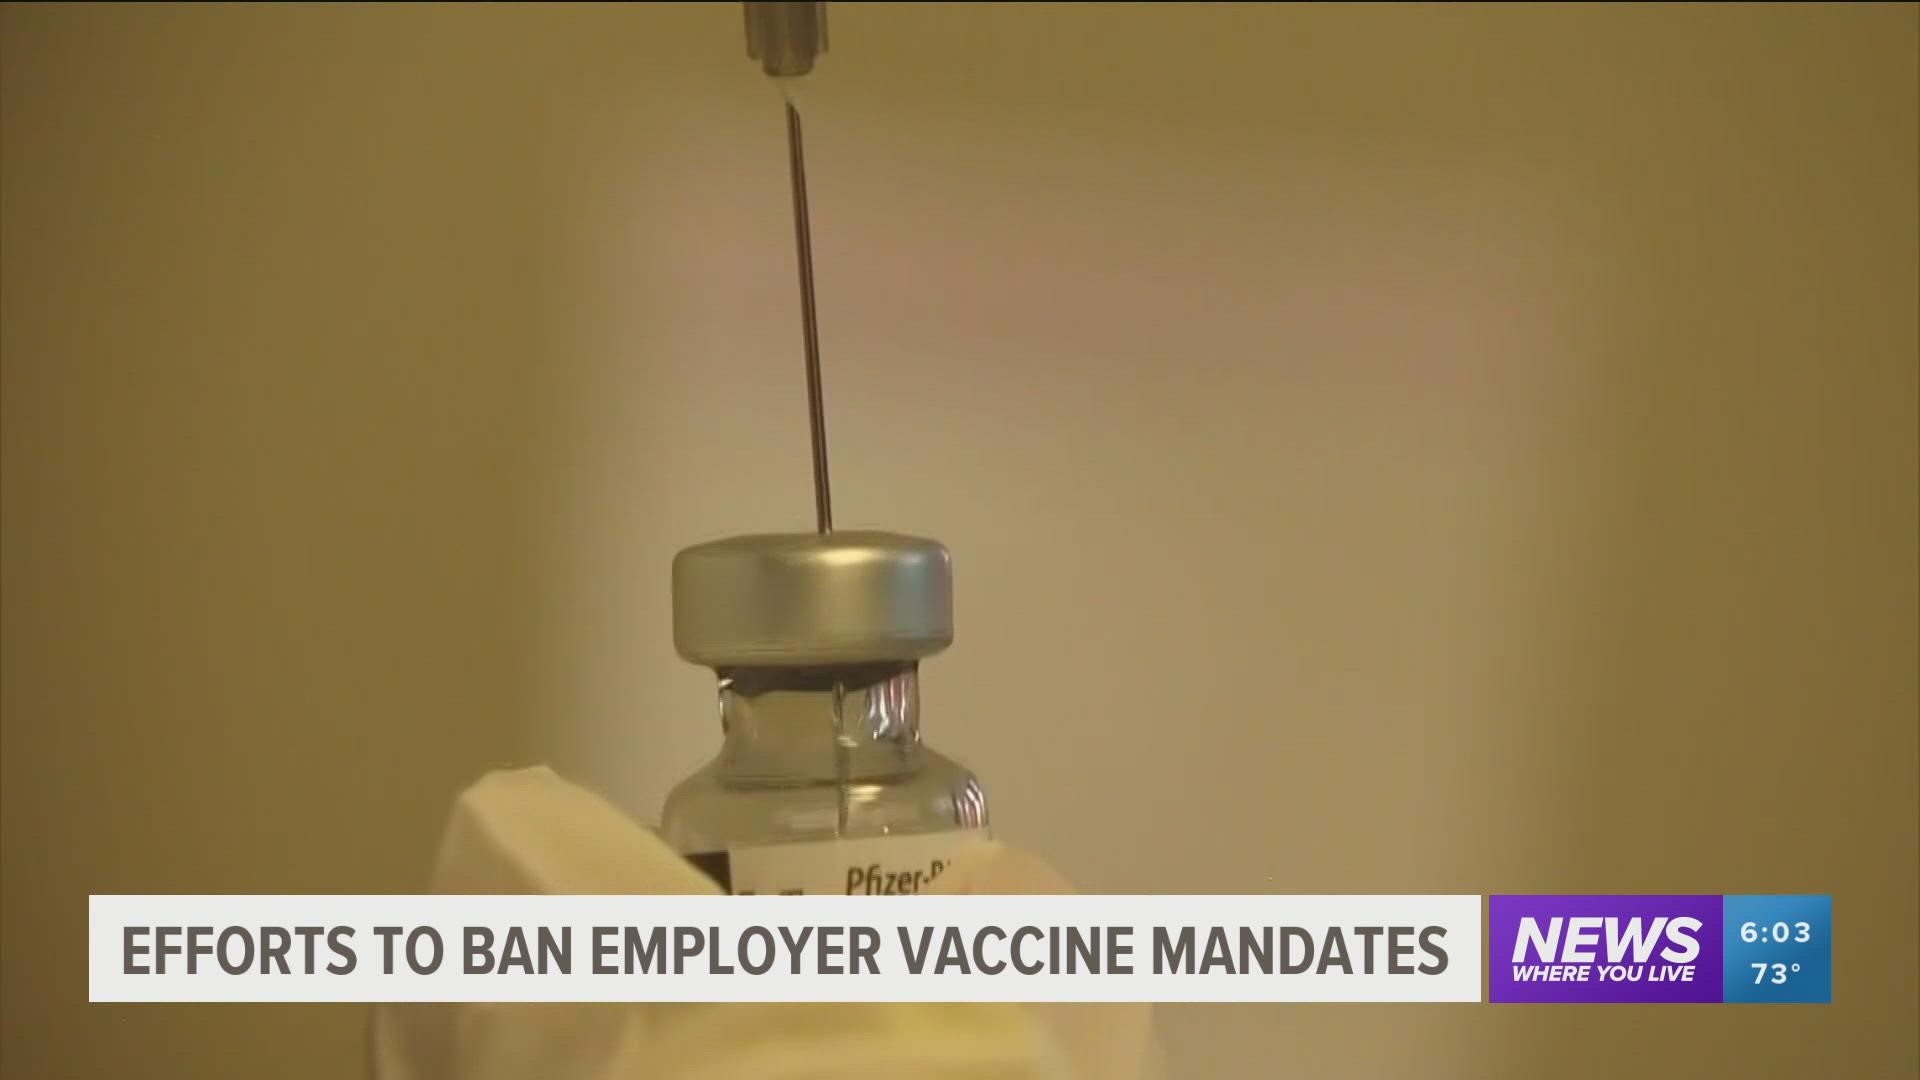 Legislation is being created to help the unvaccinated remain employed and COVID-19 vaccine free as business deadlines approach.